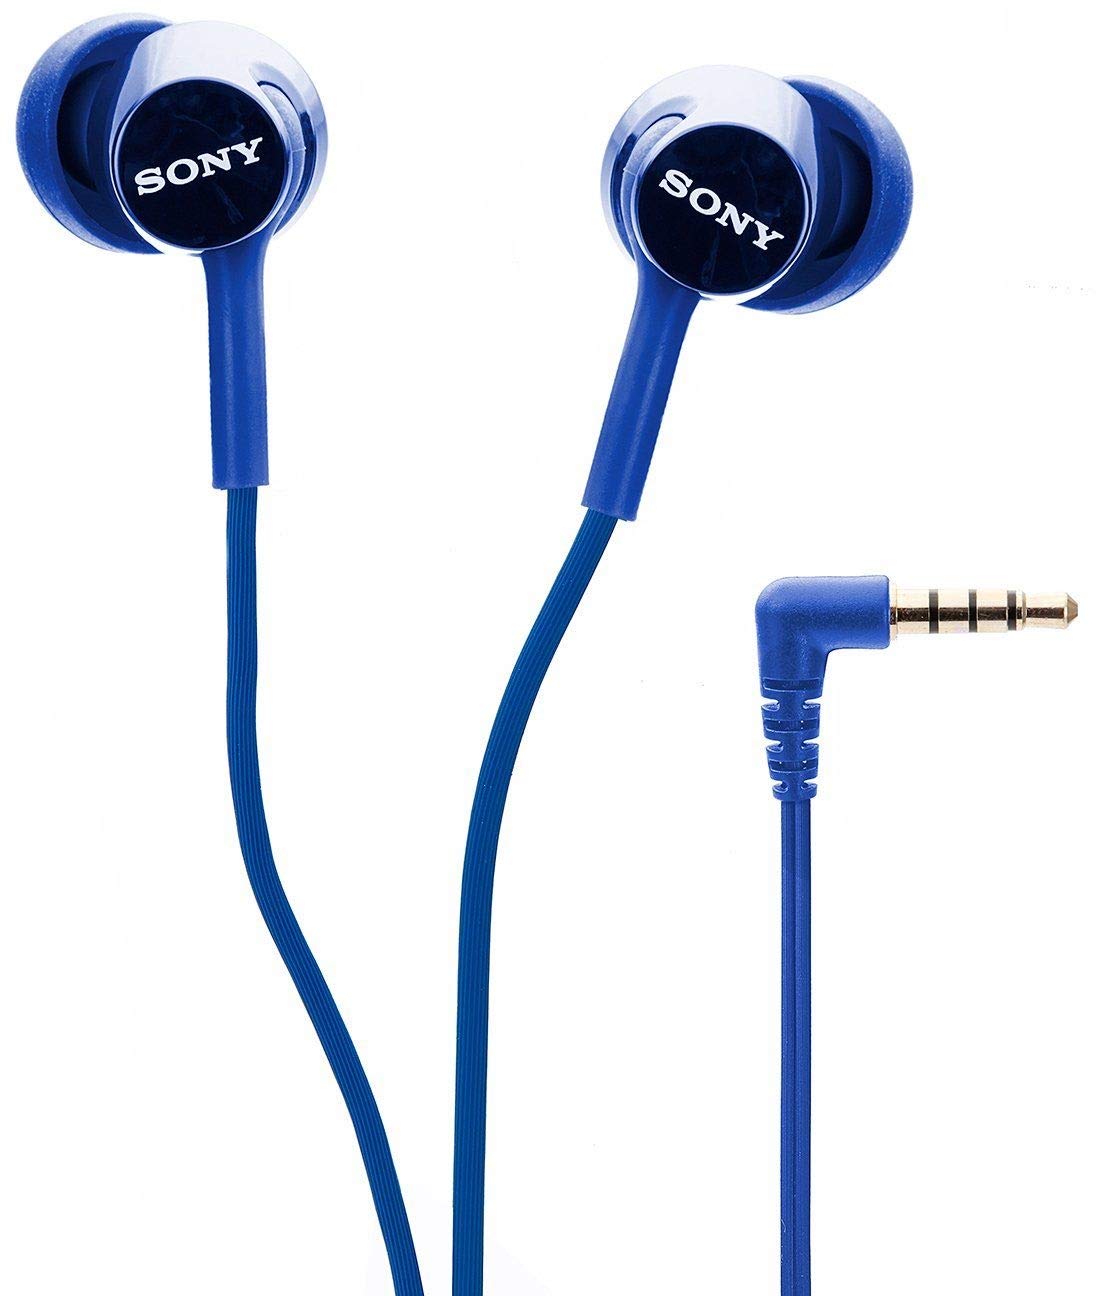 Sony MDR-EX150AP Wired In-Ear Headphones with tangle free cable, 3.5mm Jack, Headset with Mic for phone calls and 1 Year Warranty - (Dark Blue)